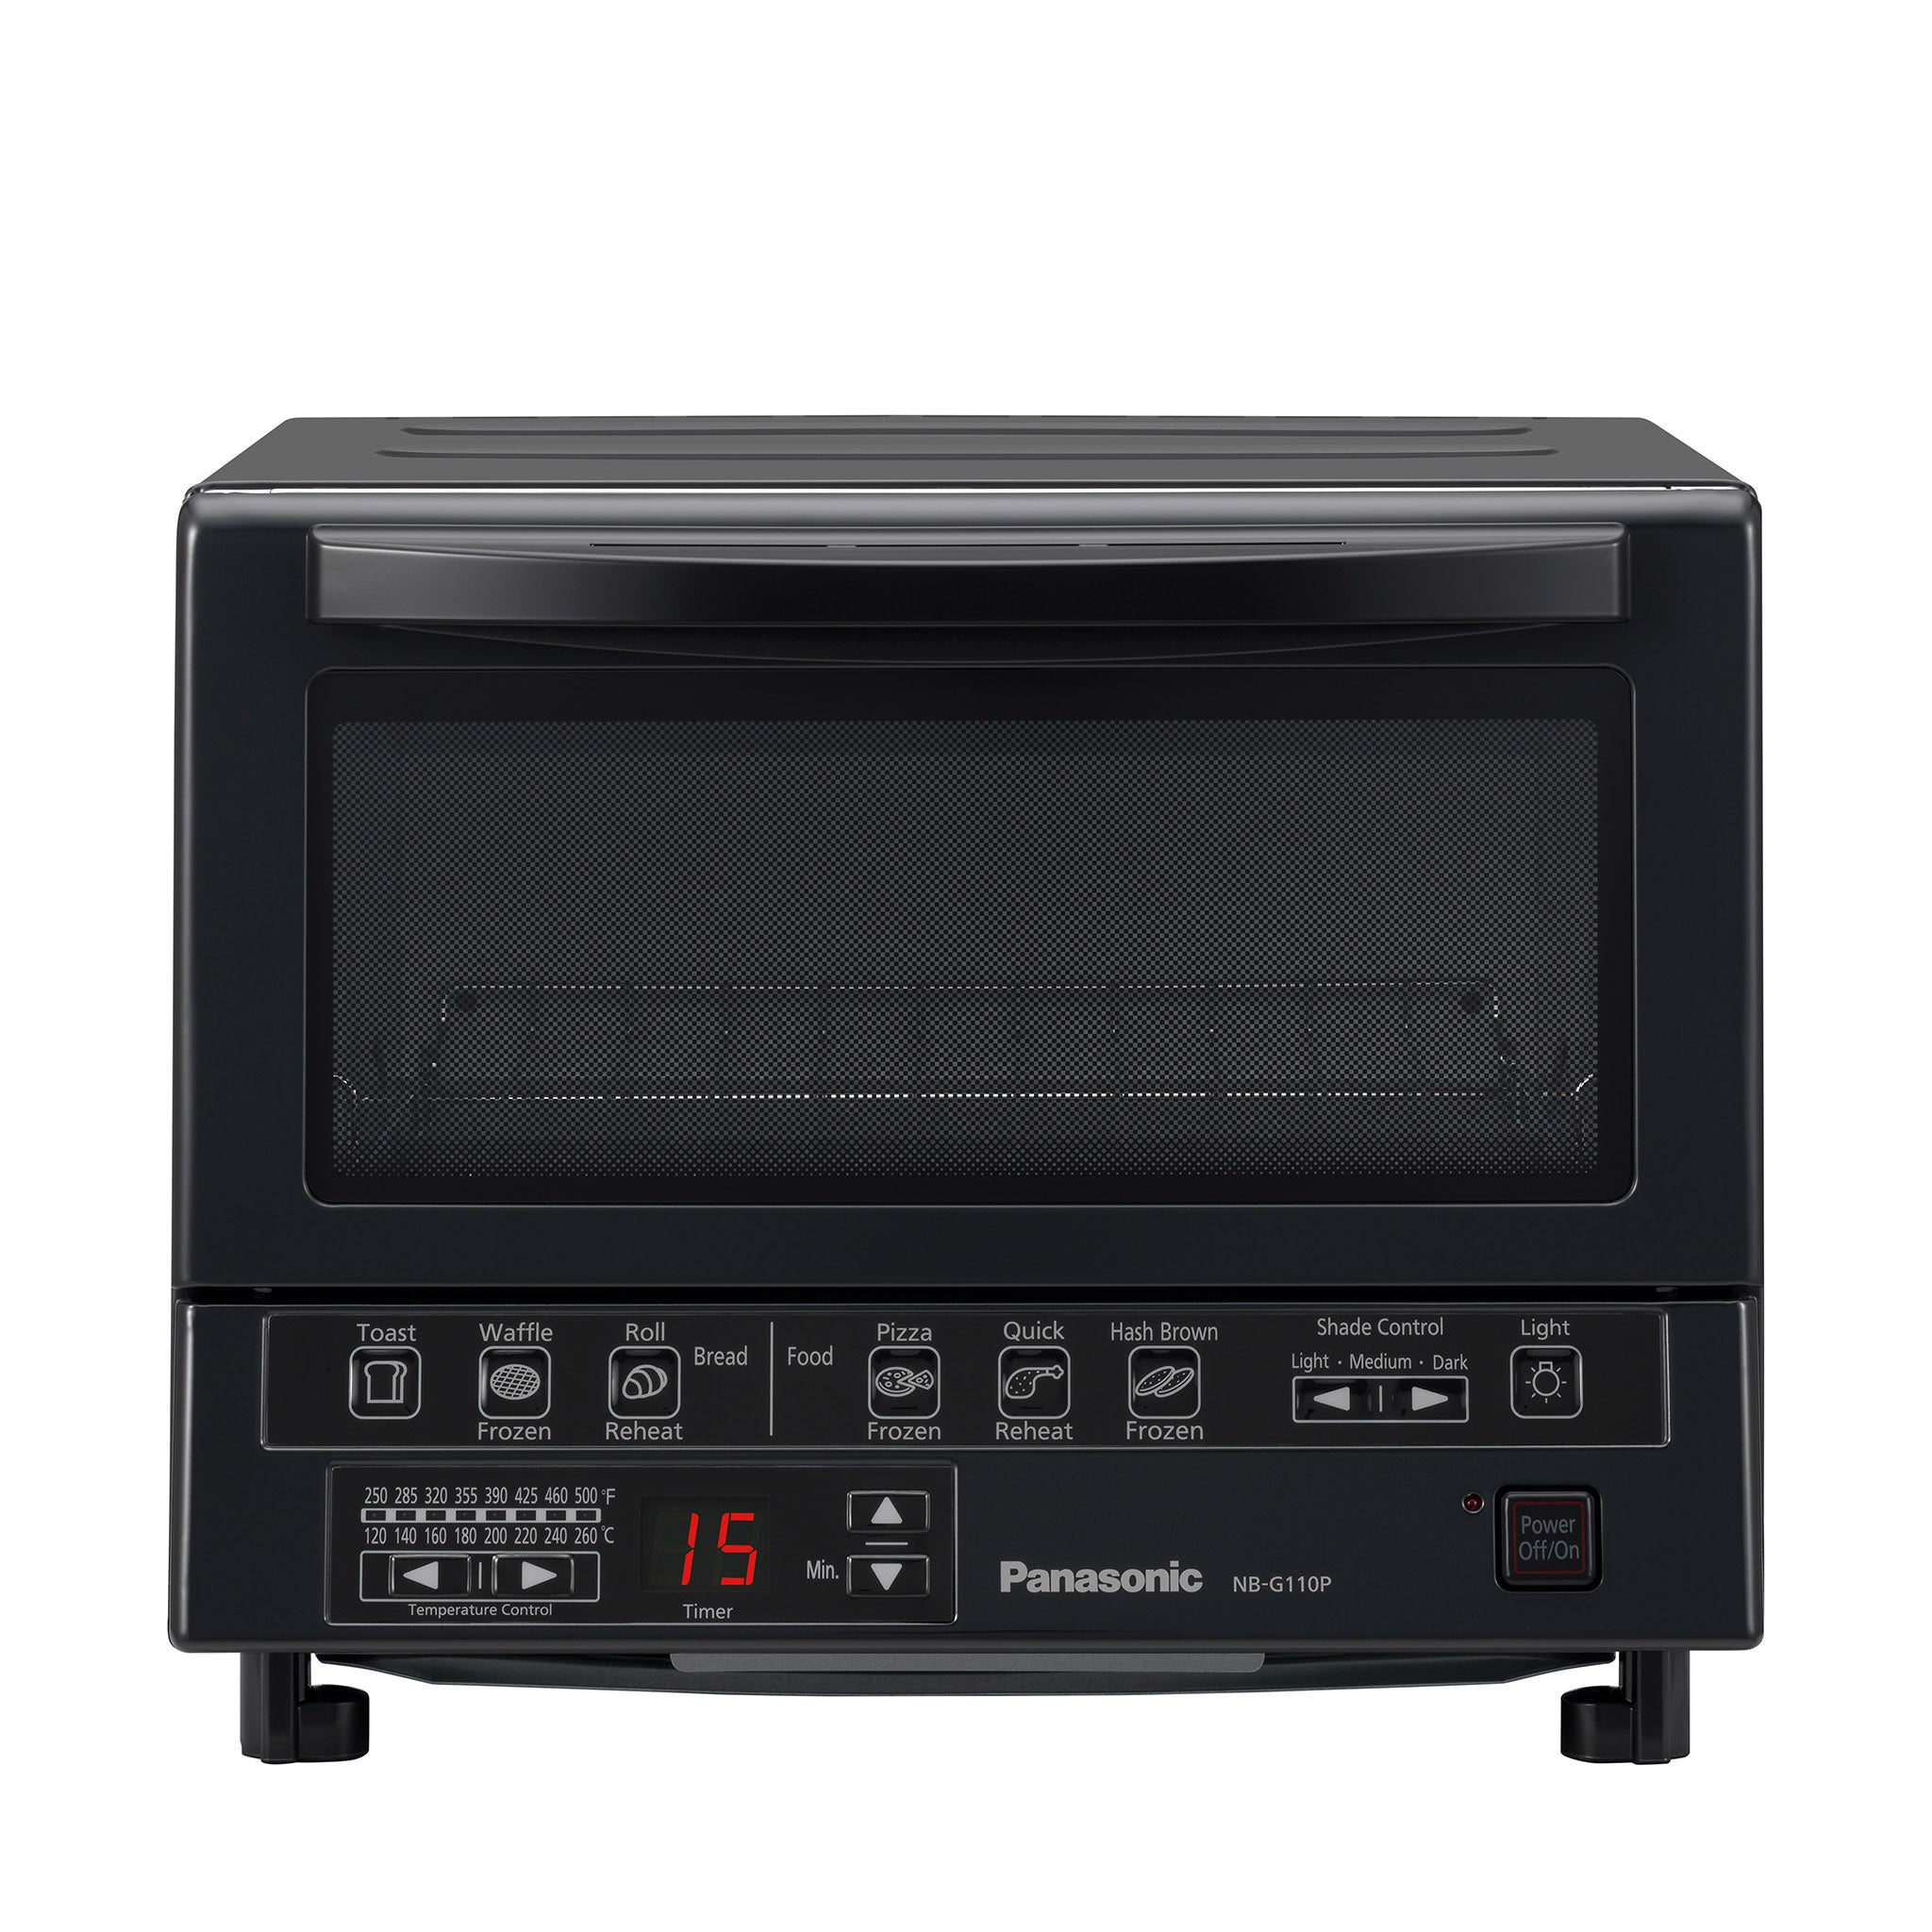 Best Buy: Panasonic FlashXpress 4-Slice Toaster Oven Stealth Gray NB-G110P